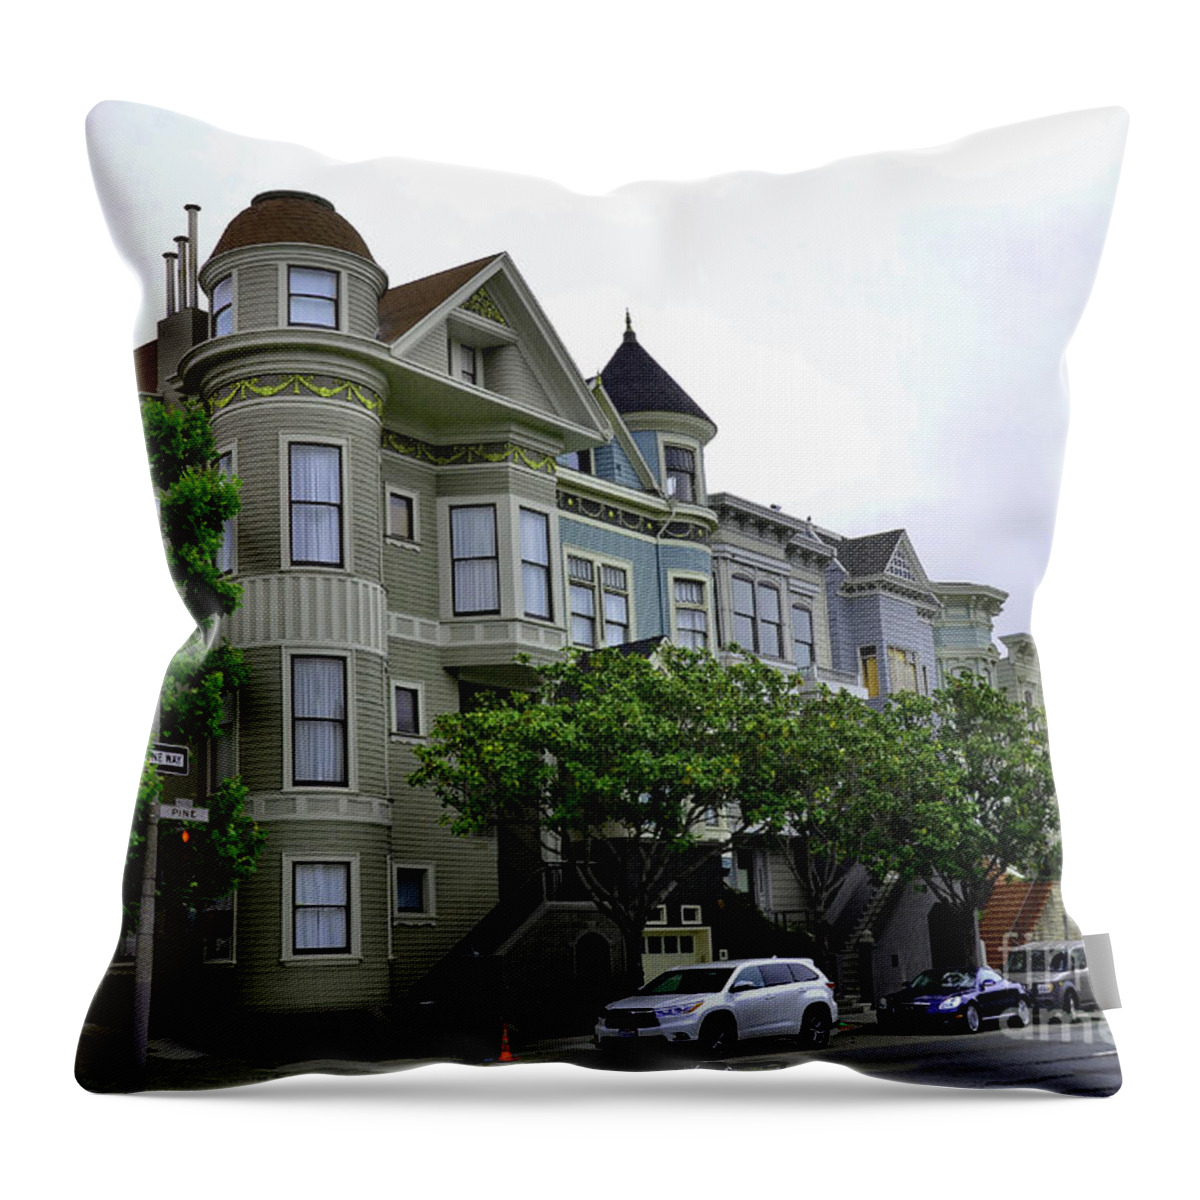 San Francisco Throw Pillow featuring the photograph San Francisco Houses by Debby Pueschel